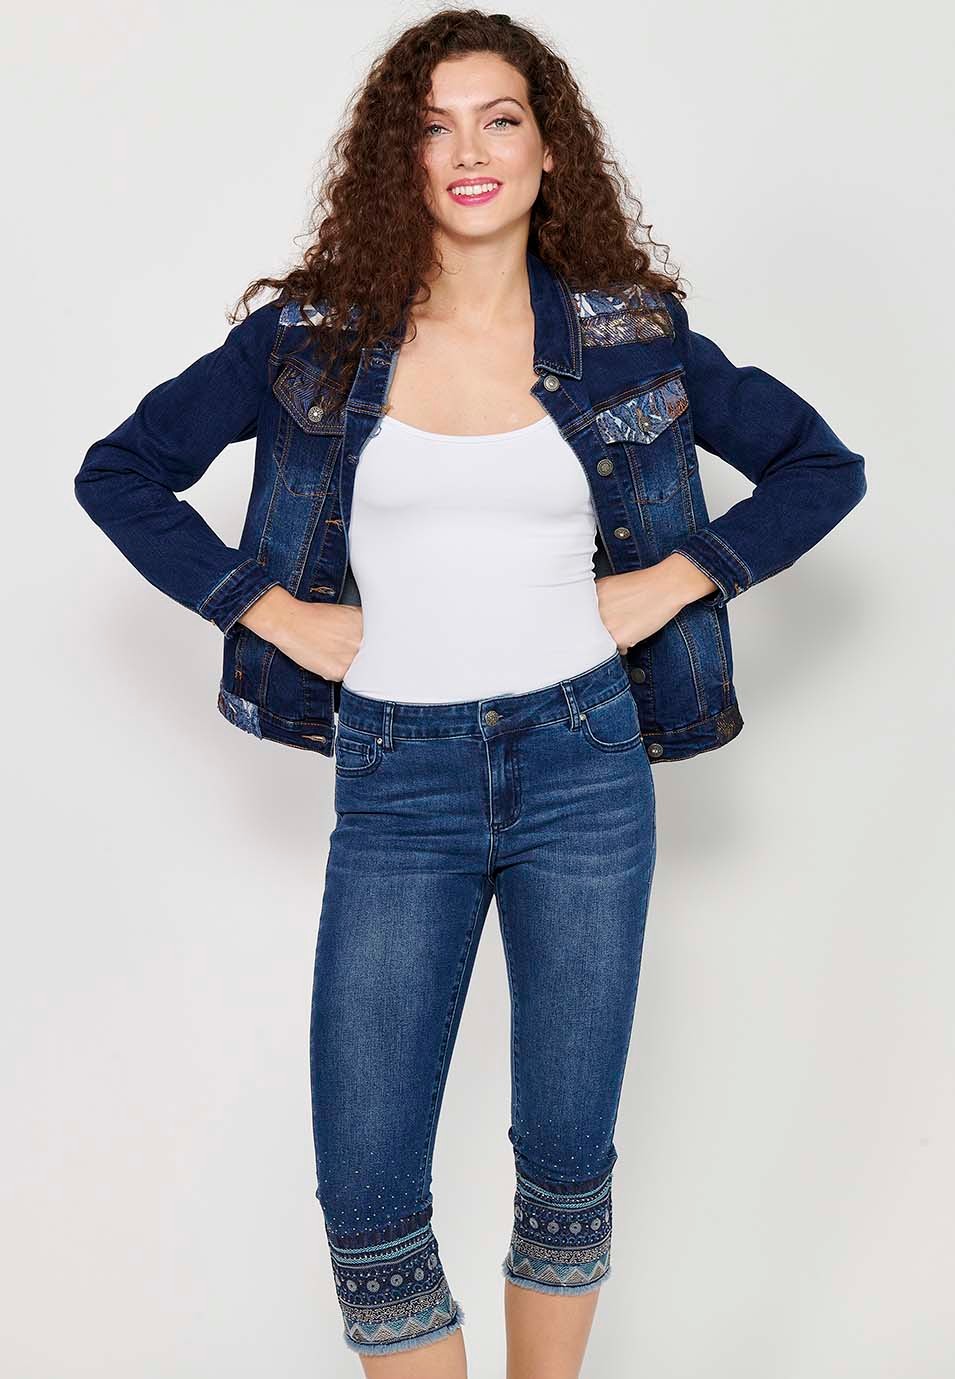 Dark Blue Long Sleeve Denim Jacket with Button Front Closure and Pockets with Embroidery on the Shoulders for Women 12